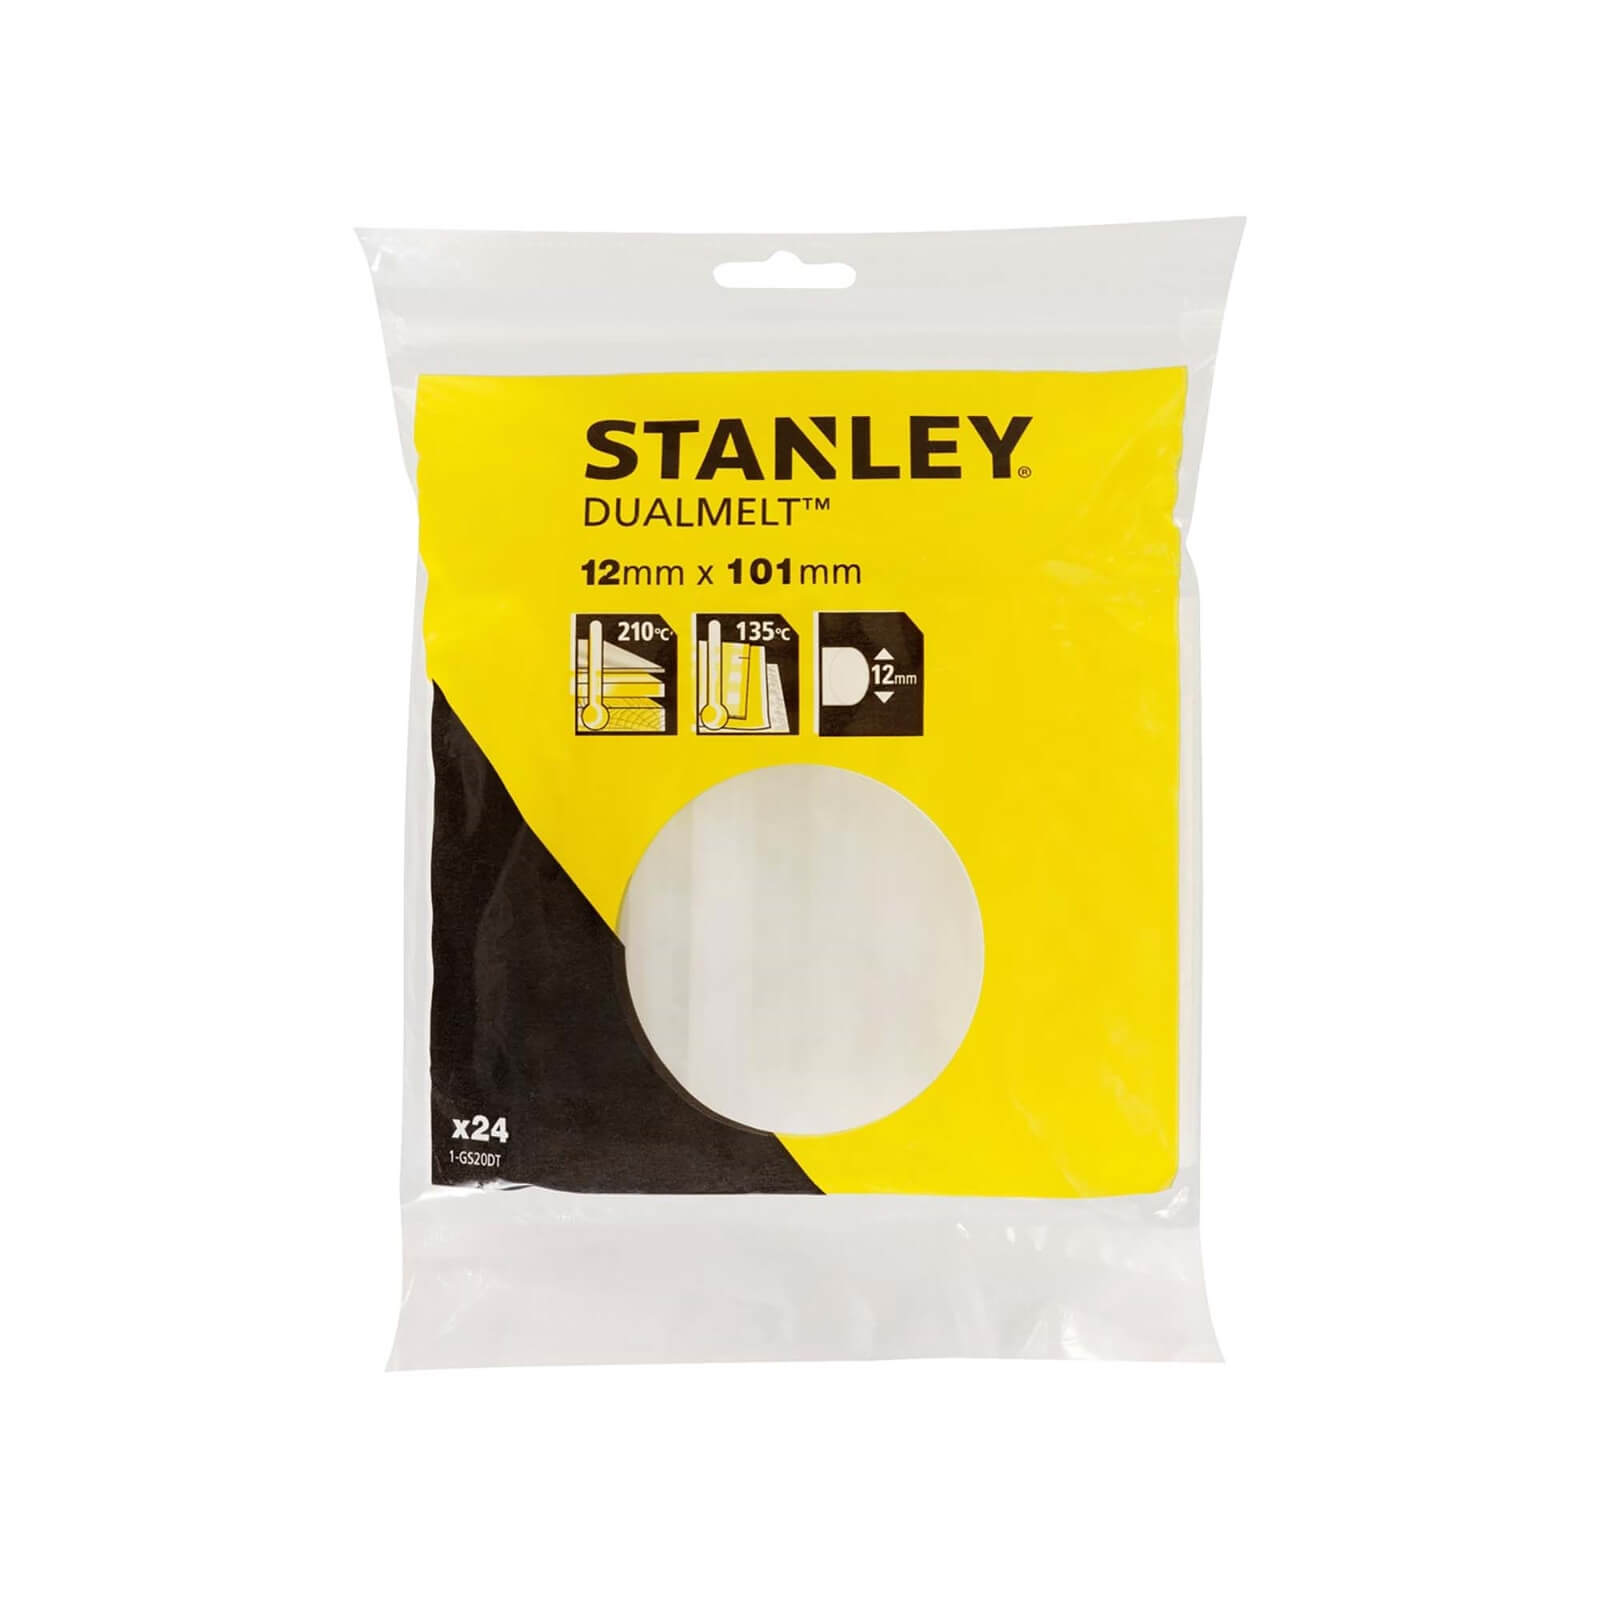 Photo of Stanley Dualmelt 12x101 Mm Glue Sticks - Pack Of 24 -1-gs20dt-